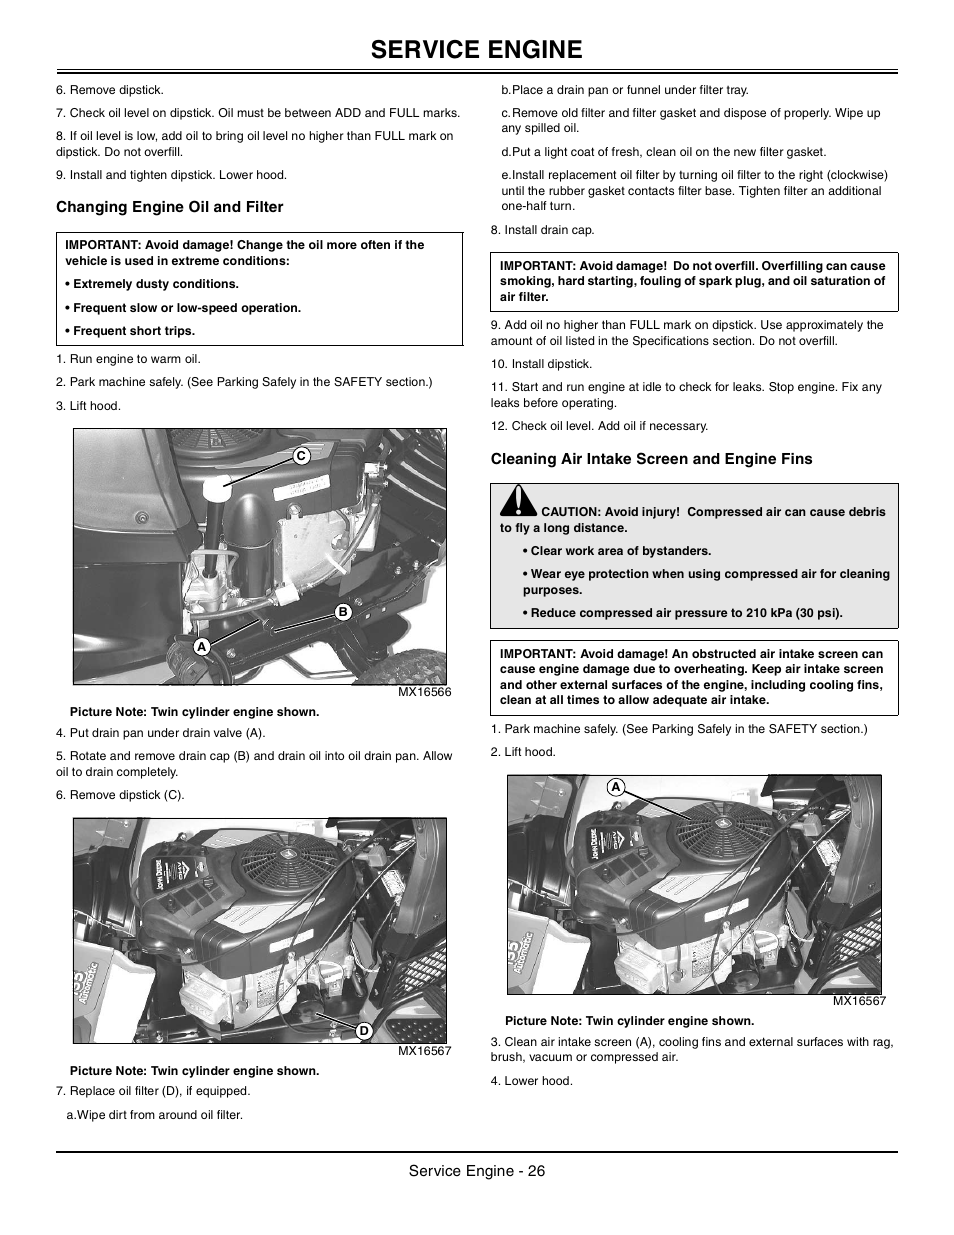 Changing engine oil and filter, Cleaning air intake screen and engine fins, Service engine | John Deere la105 User Manual | Page 27 / 52